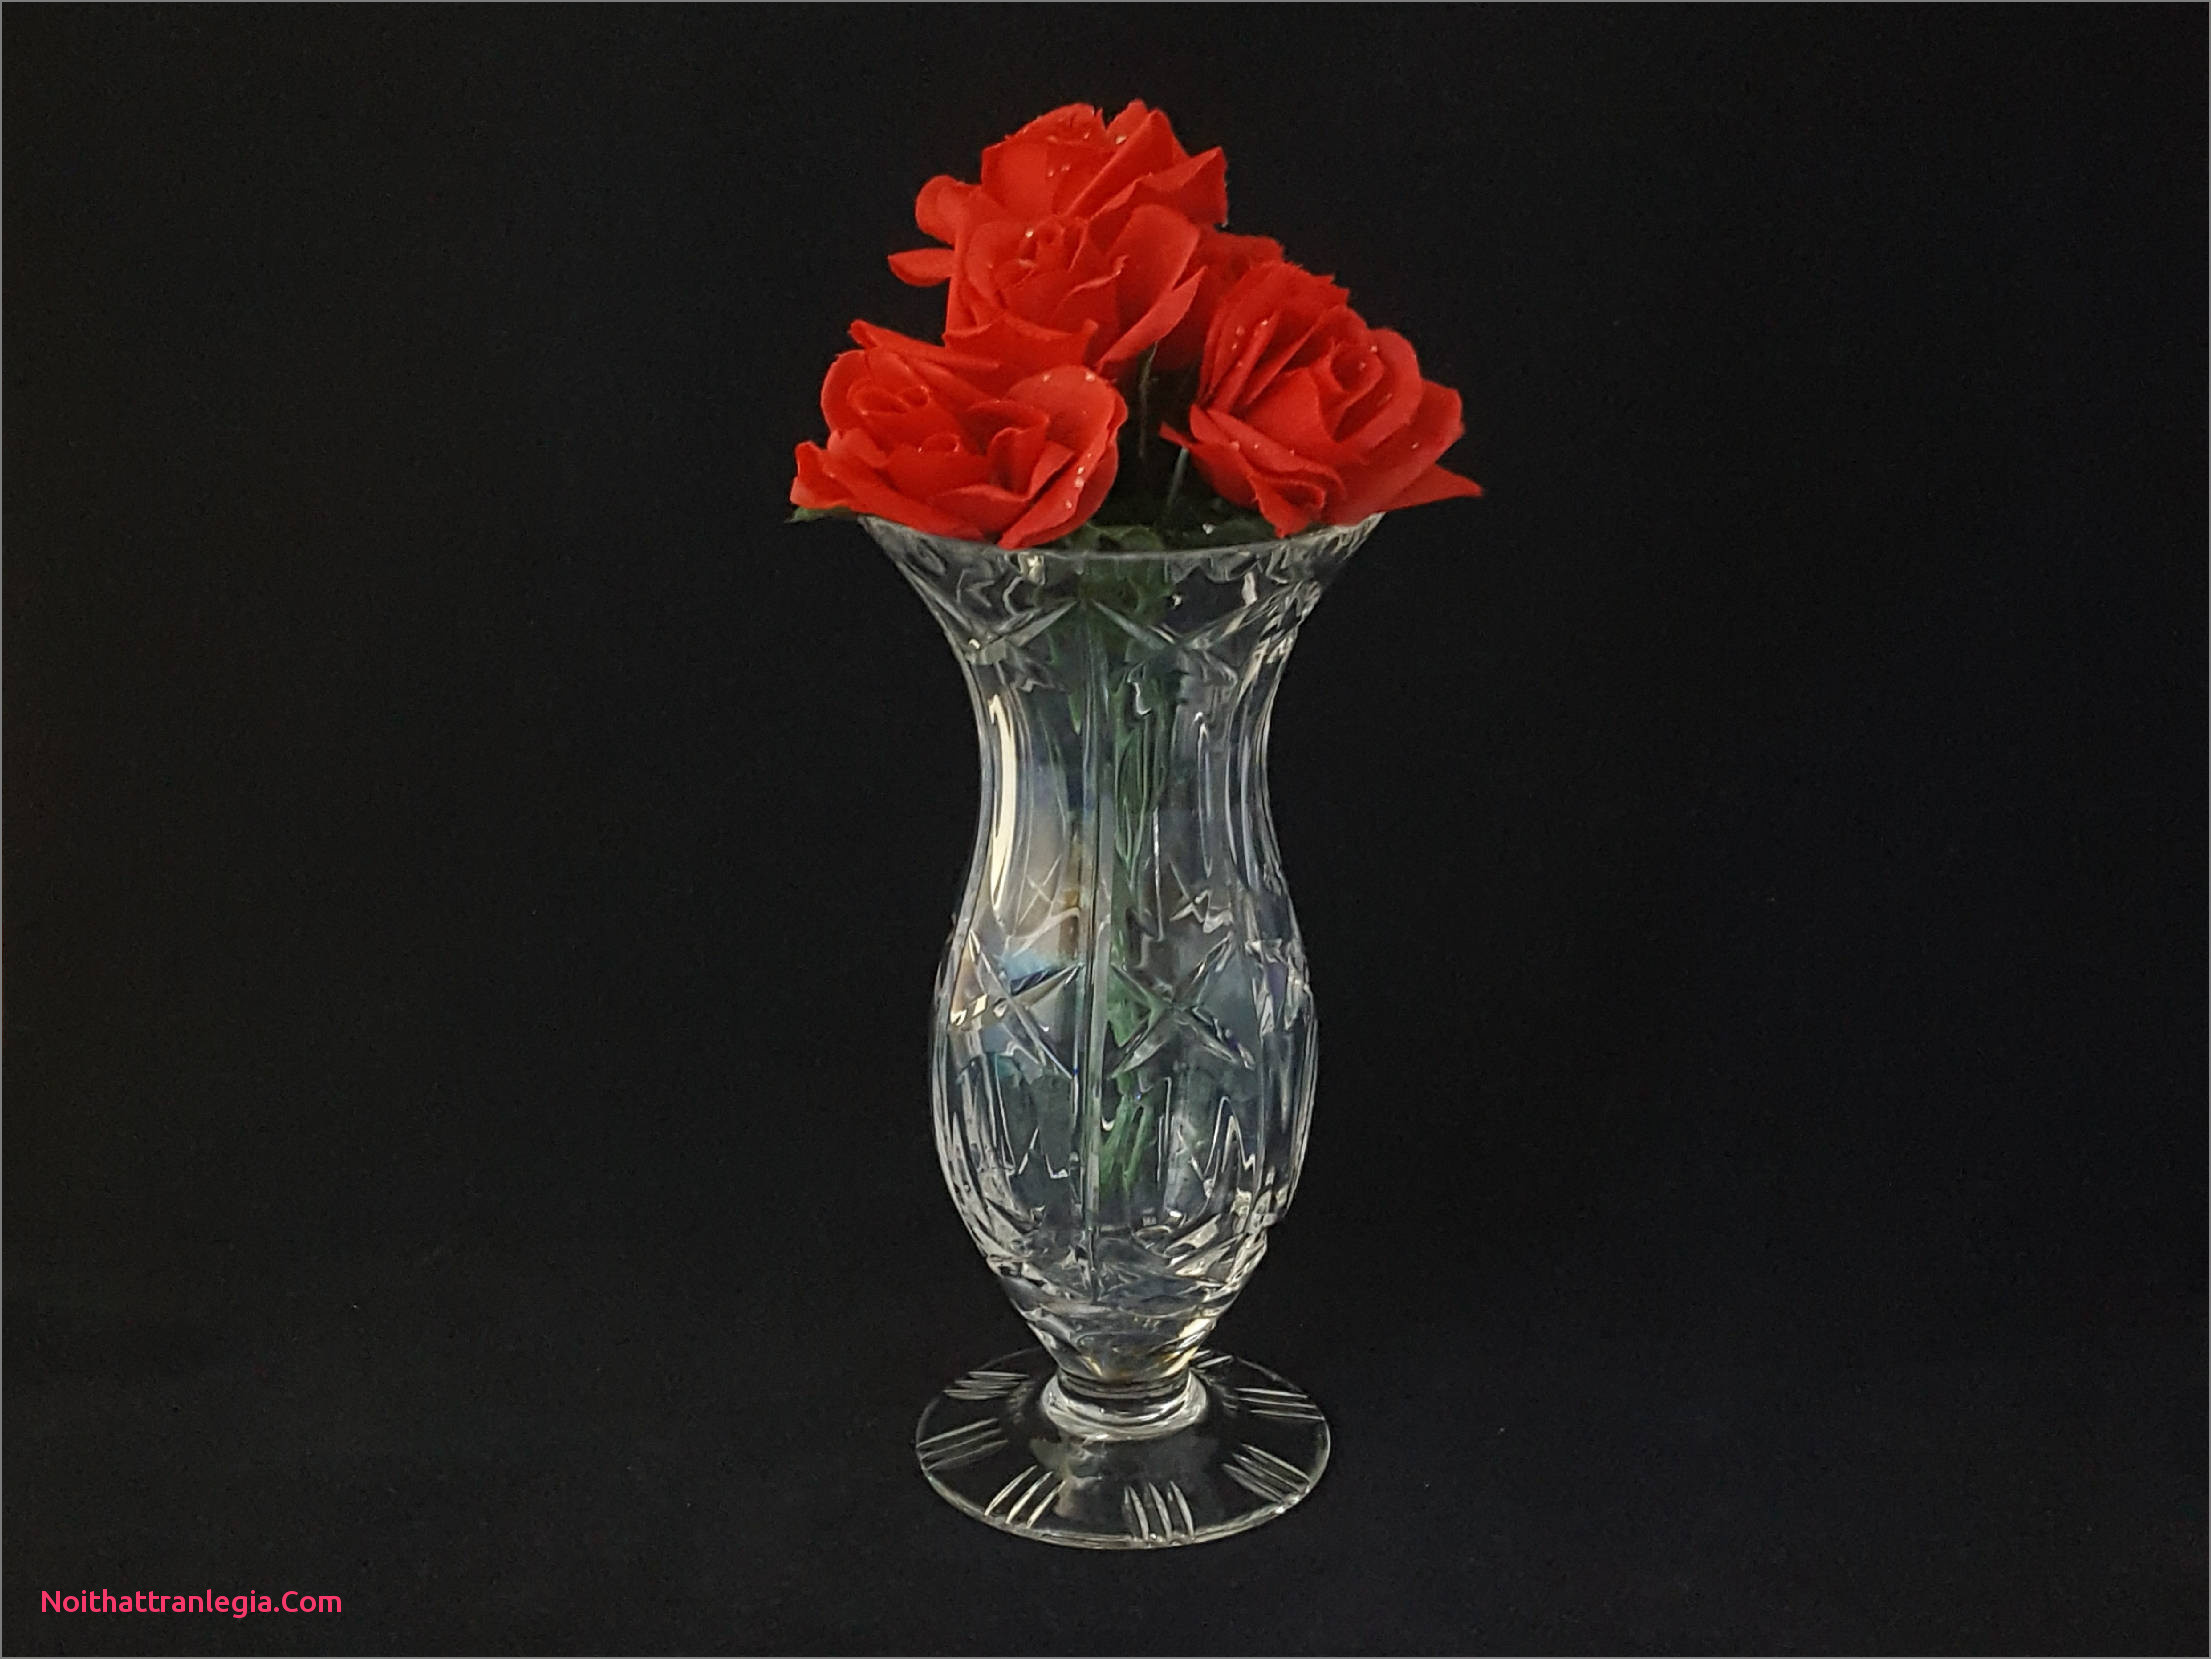 18 attractive Small Antique Glass Vases 2024 free download small antique glass vases of 20 cut glass antique vase noithattranlegia vases design pertaining to aac2b8ac2bdzoom vintage cross and olive glass vase